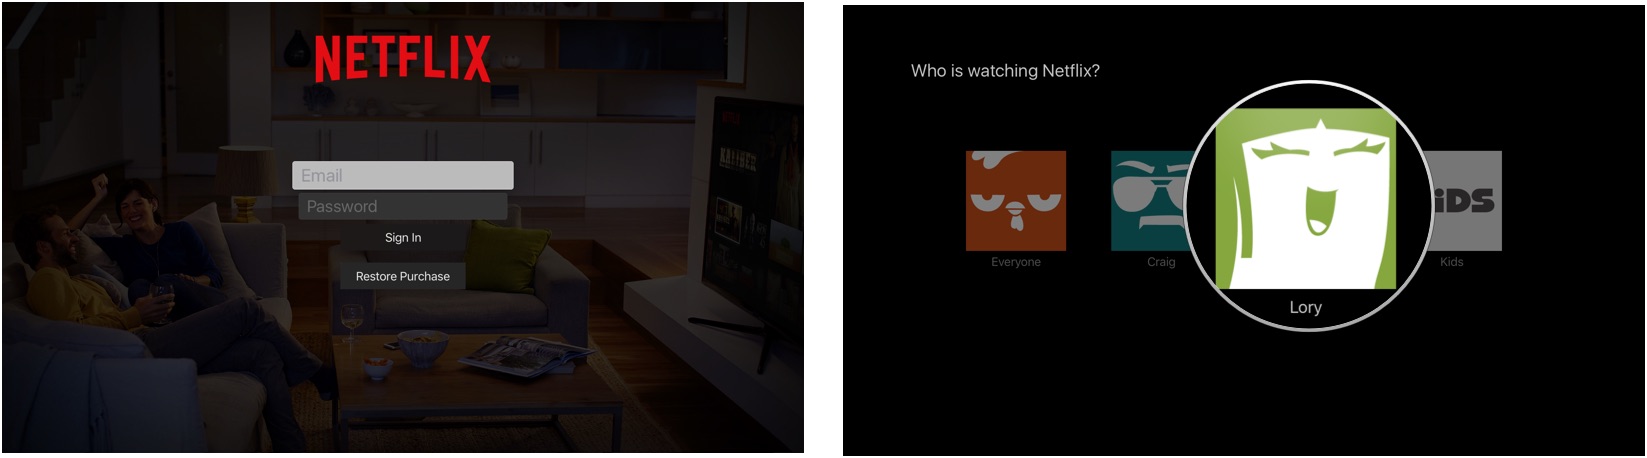 Who&#39;s Watching in Neflix on Apple TV